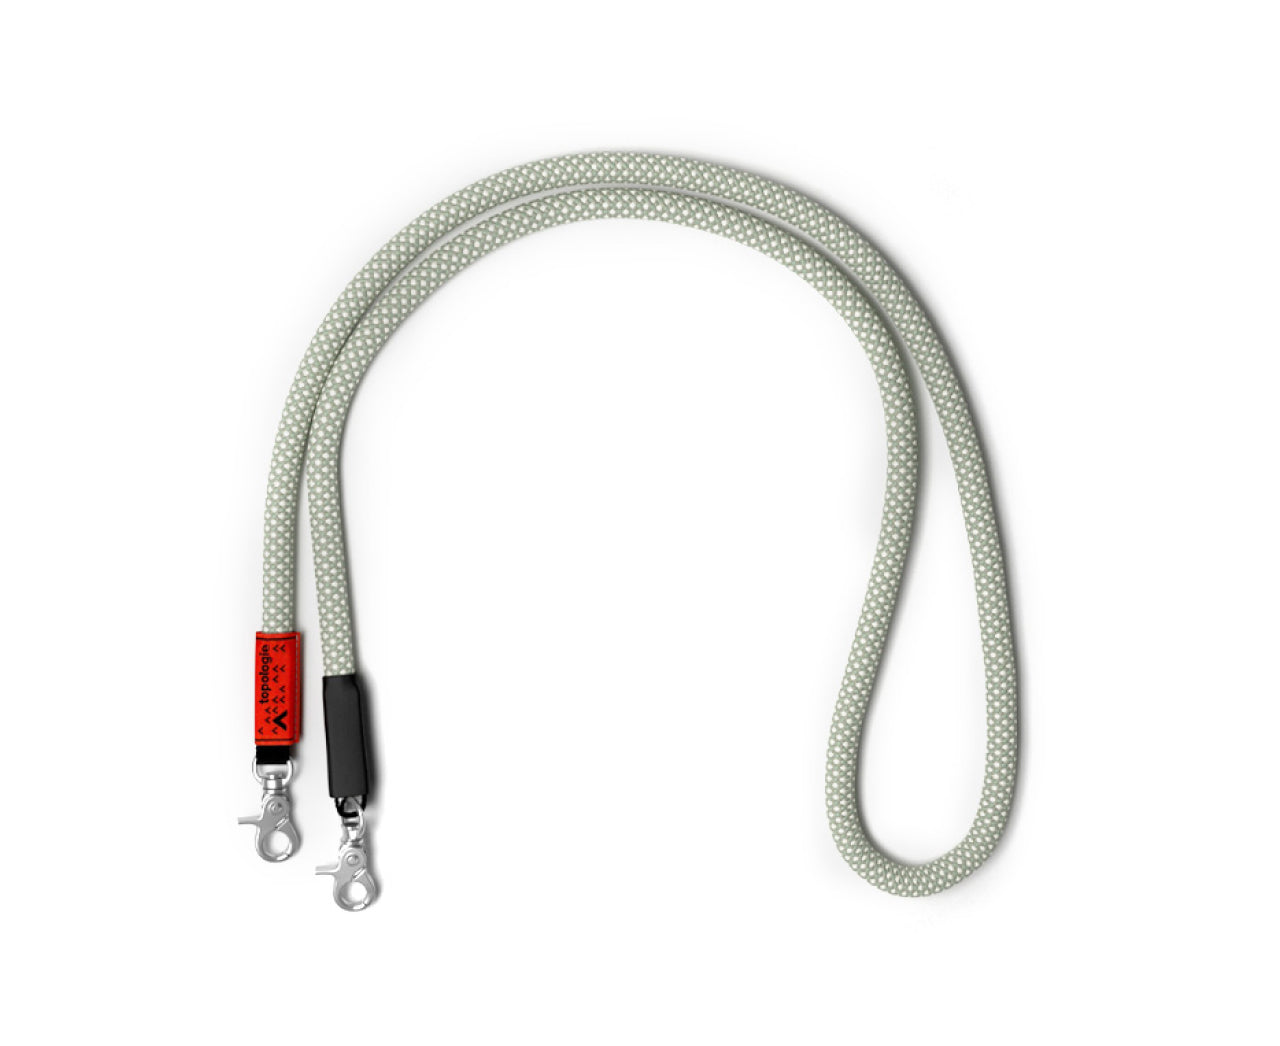 Wares Rope Strap - 10mm